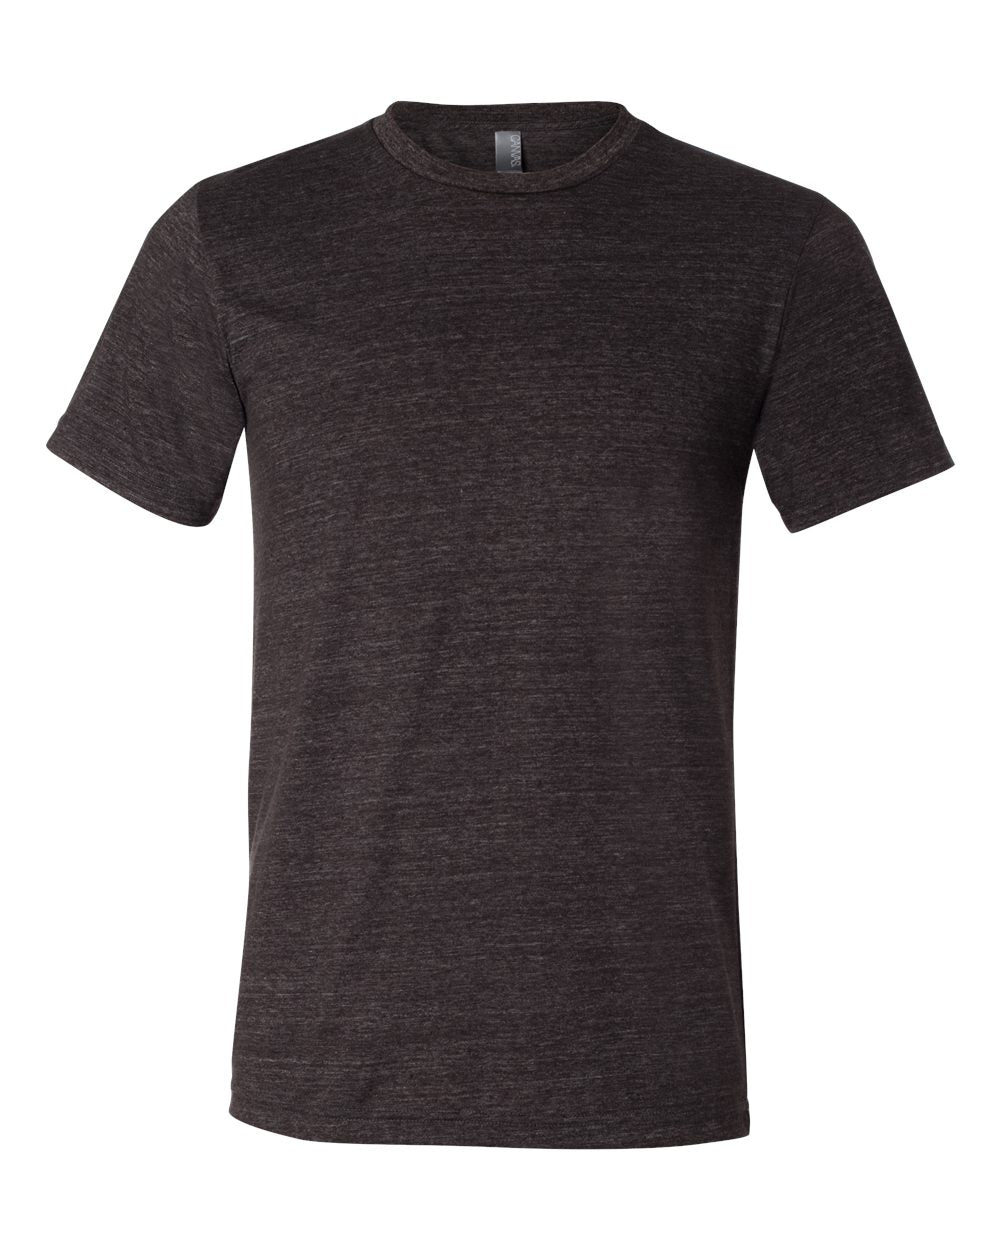 Bella + Canvas Triblend Tee (3413) in Charcoal Black Triblend